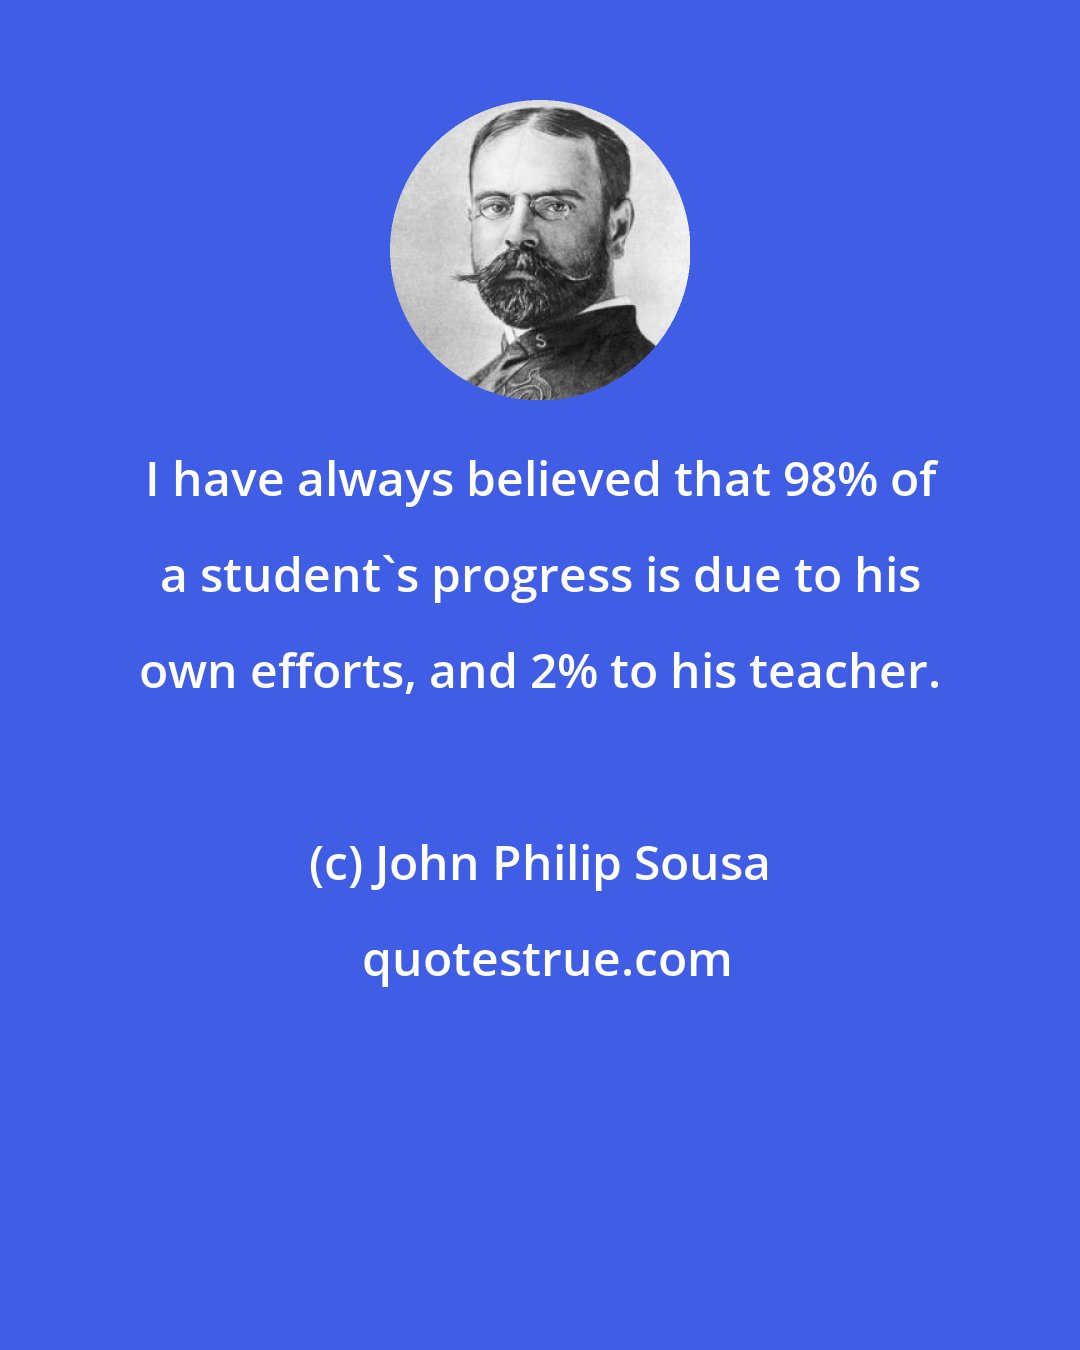 John Philip Sousa: I have always believed that 98% of a student's progress is due to his own efforts, and 2% to his teacher.